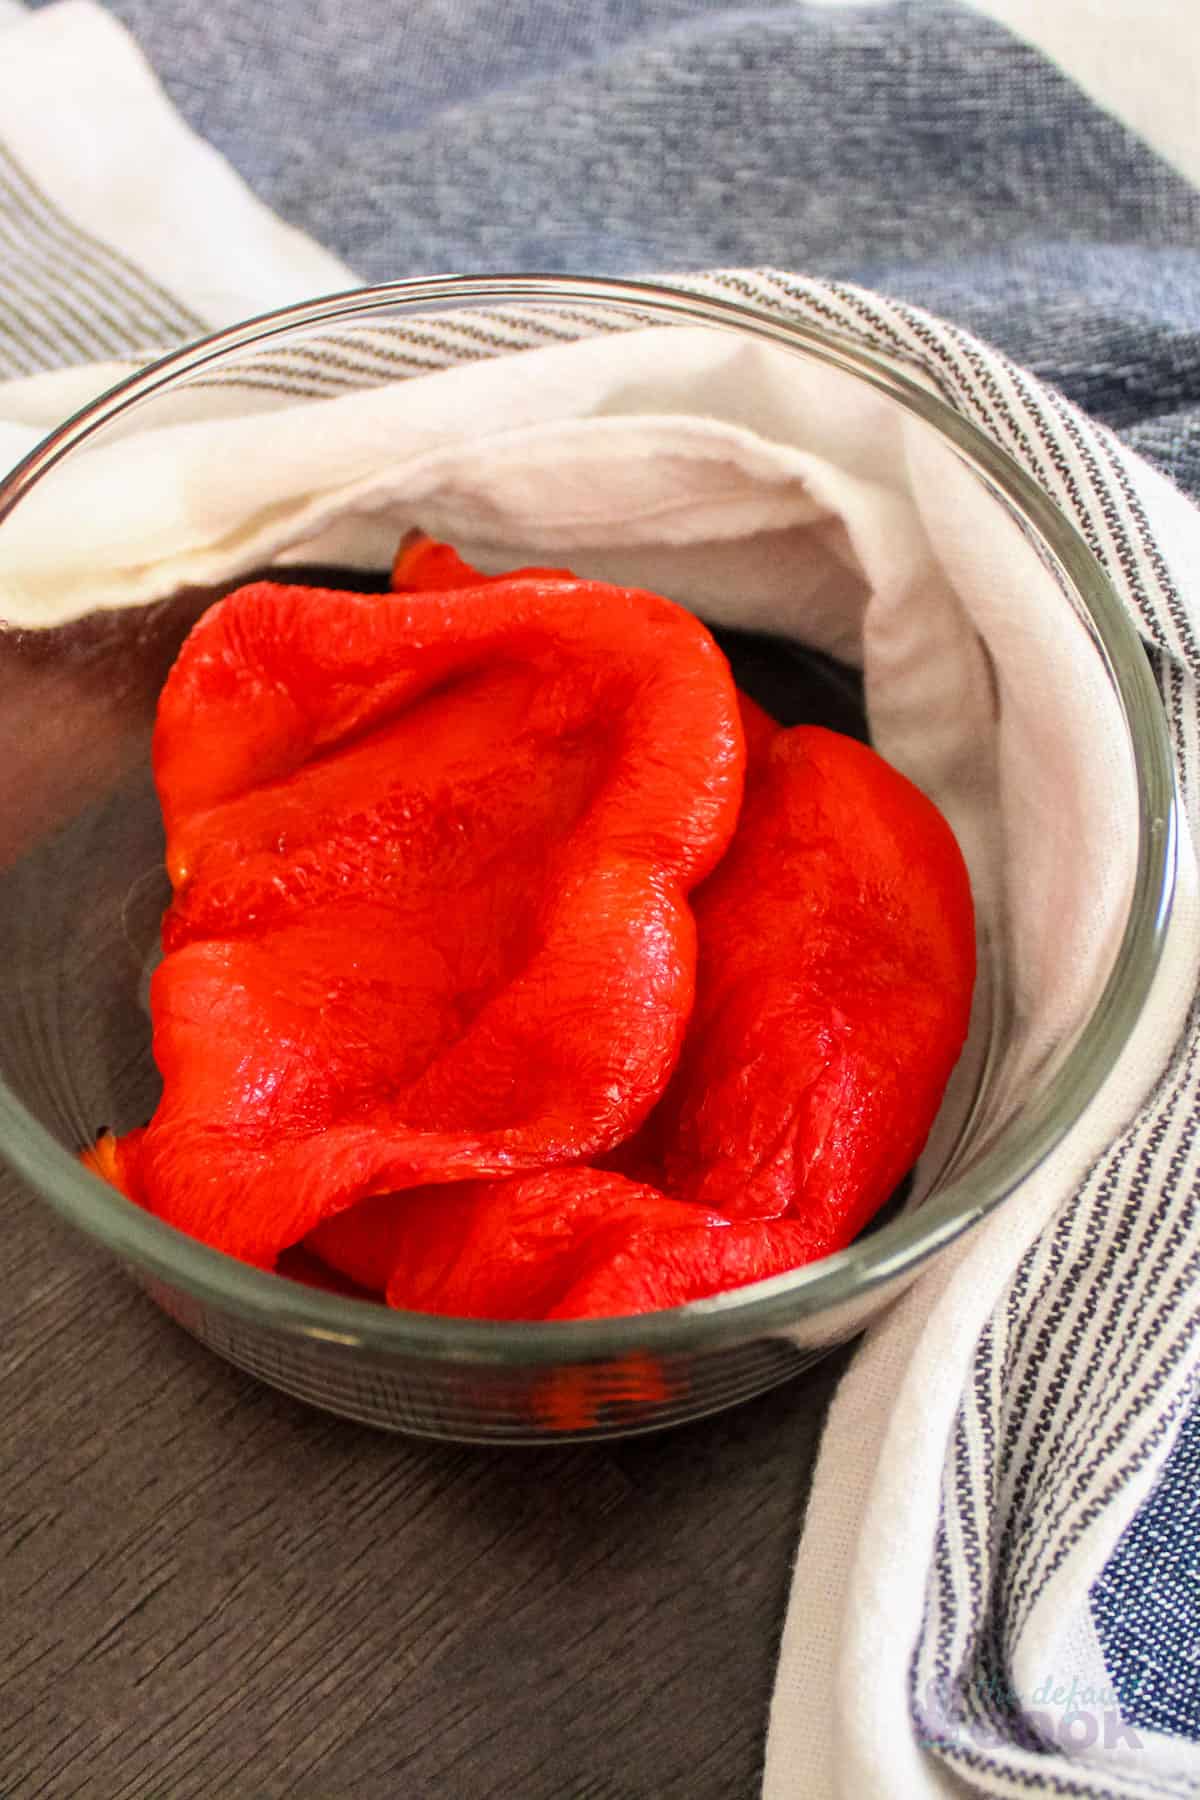 Roasted red peppers in glass bowl with blue and white towl around it.